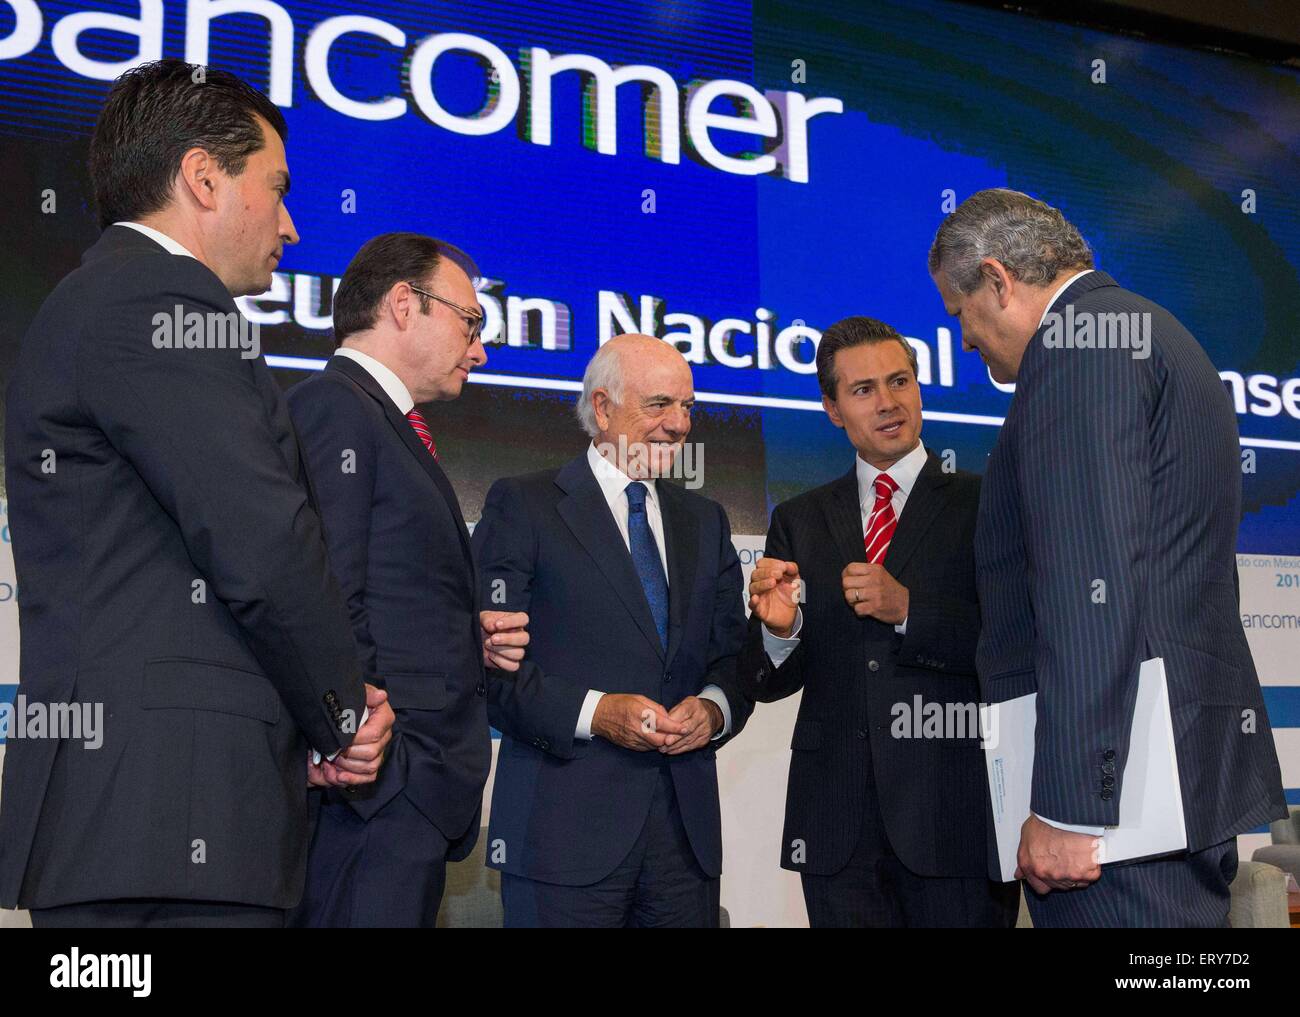 Mexico City, Mexico. 9th June, 2015. Image provided by Mexico's Presidency shows Mexican President Enrique Pena Nieto (2nd, R) and Minister of Finance Luis Videgaray (2nd, L) talking with the attendees during the 2015 BBVA Bancomer National Meeting of Counselors in Mexico City, capital of Mexico, on June 9, 2015. © Mexico's Presidency/Xinhua/Alamy Live News Stock Photo